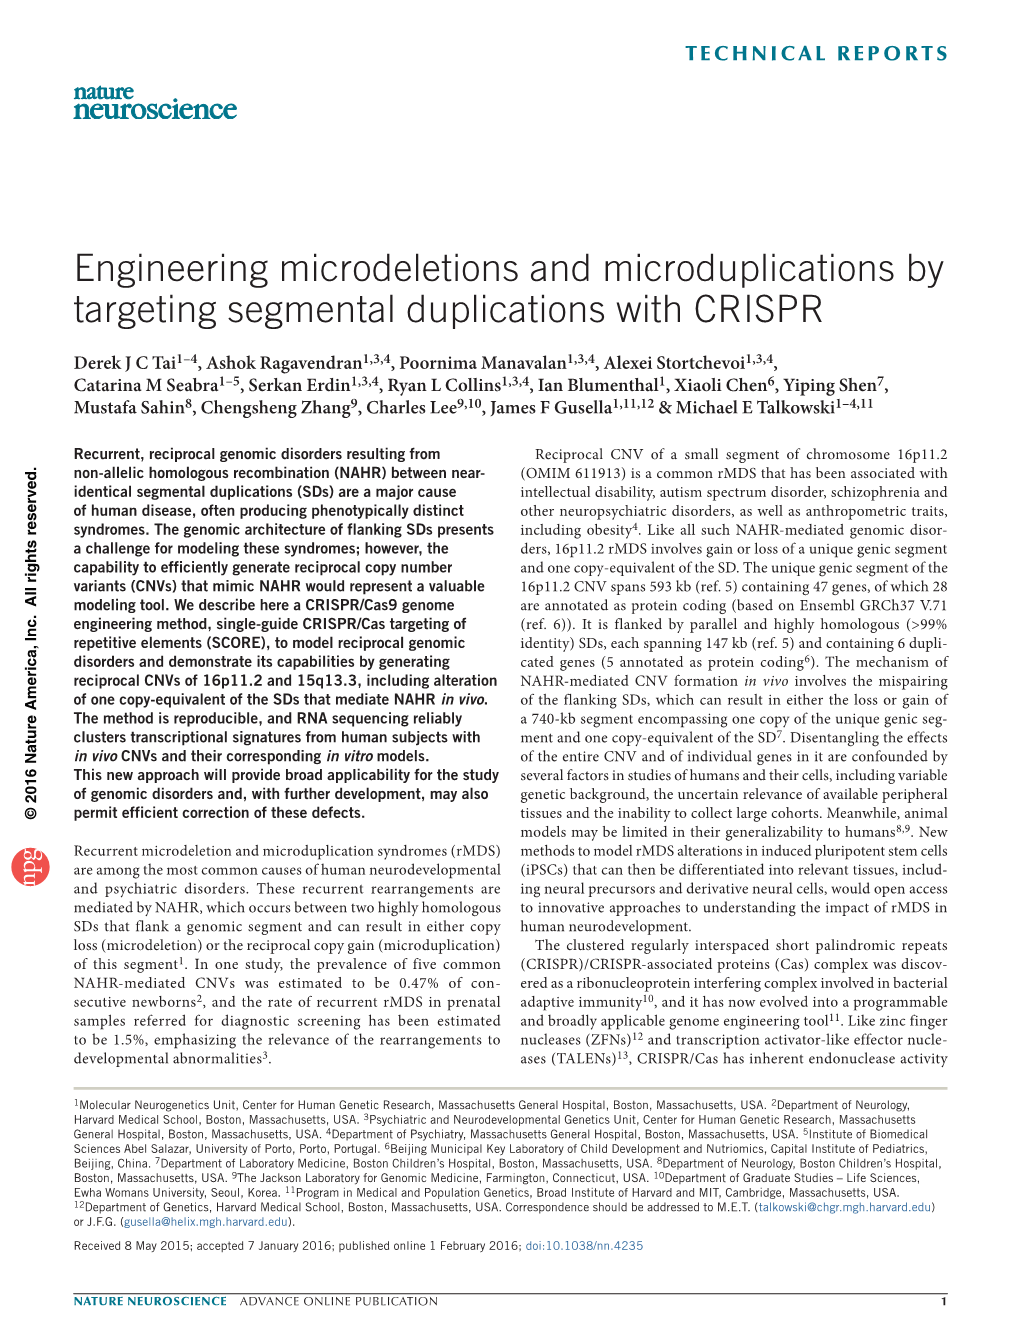 Engineering Microdeletions and Microduplications by Targeting